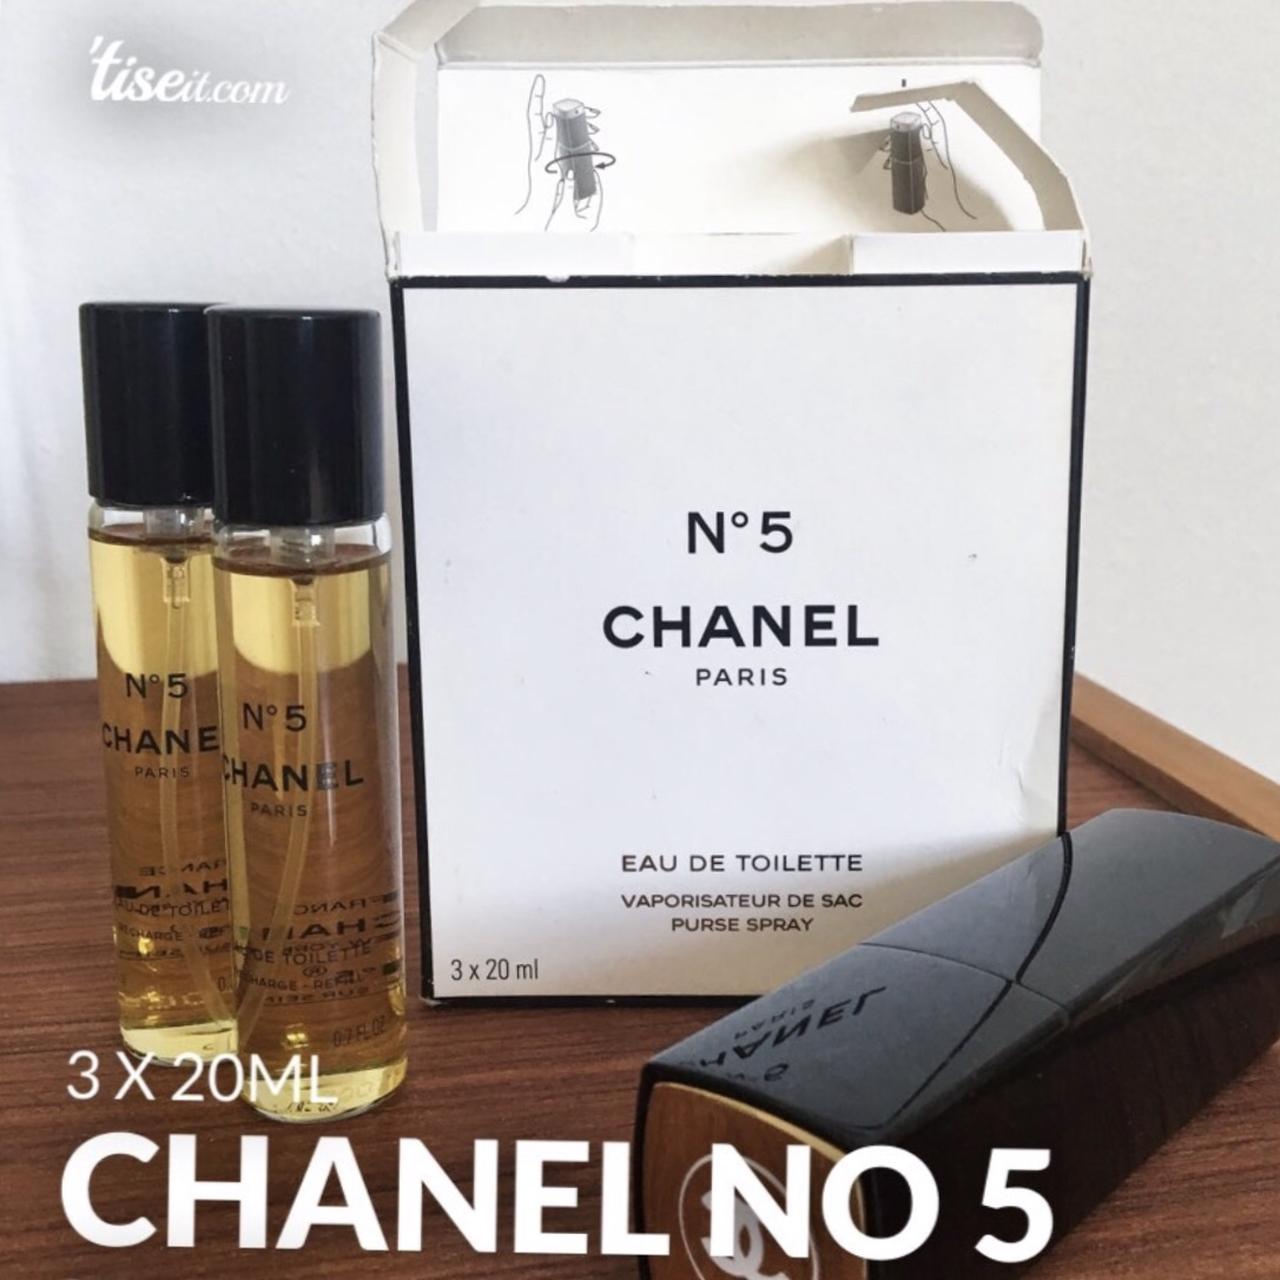 Chanel no 5 perfume plus 2 refills. There are 3 x - Depop